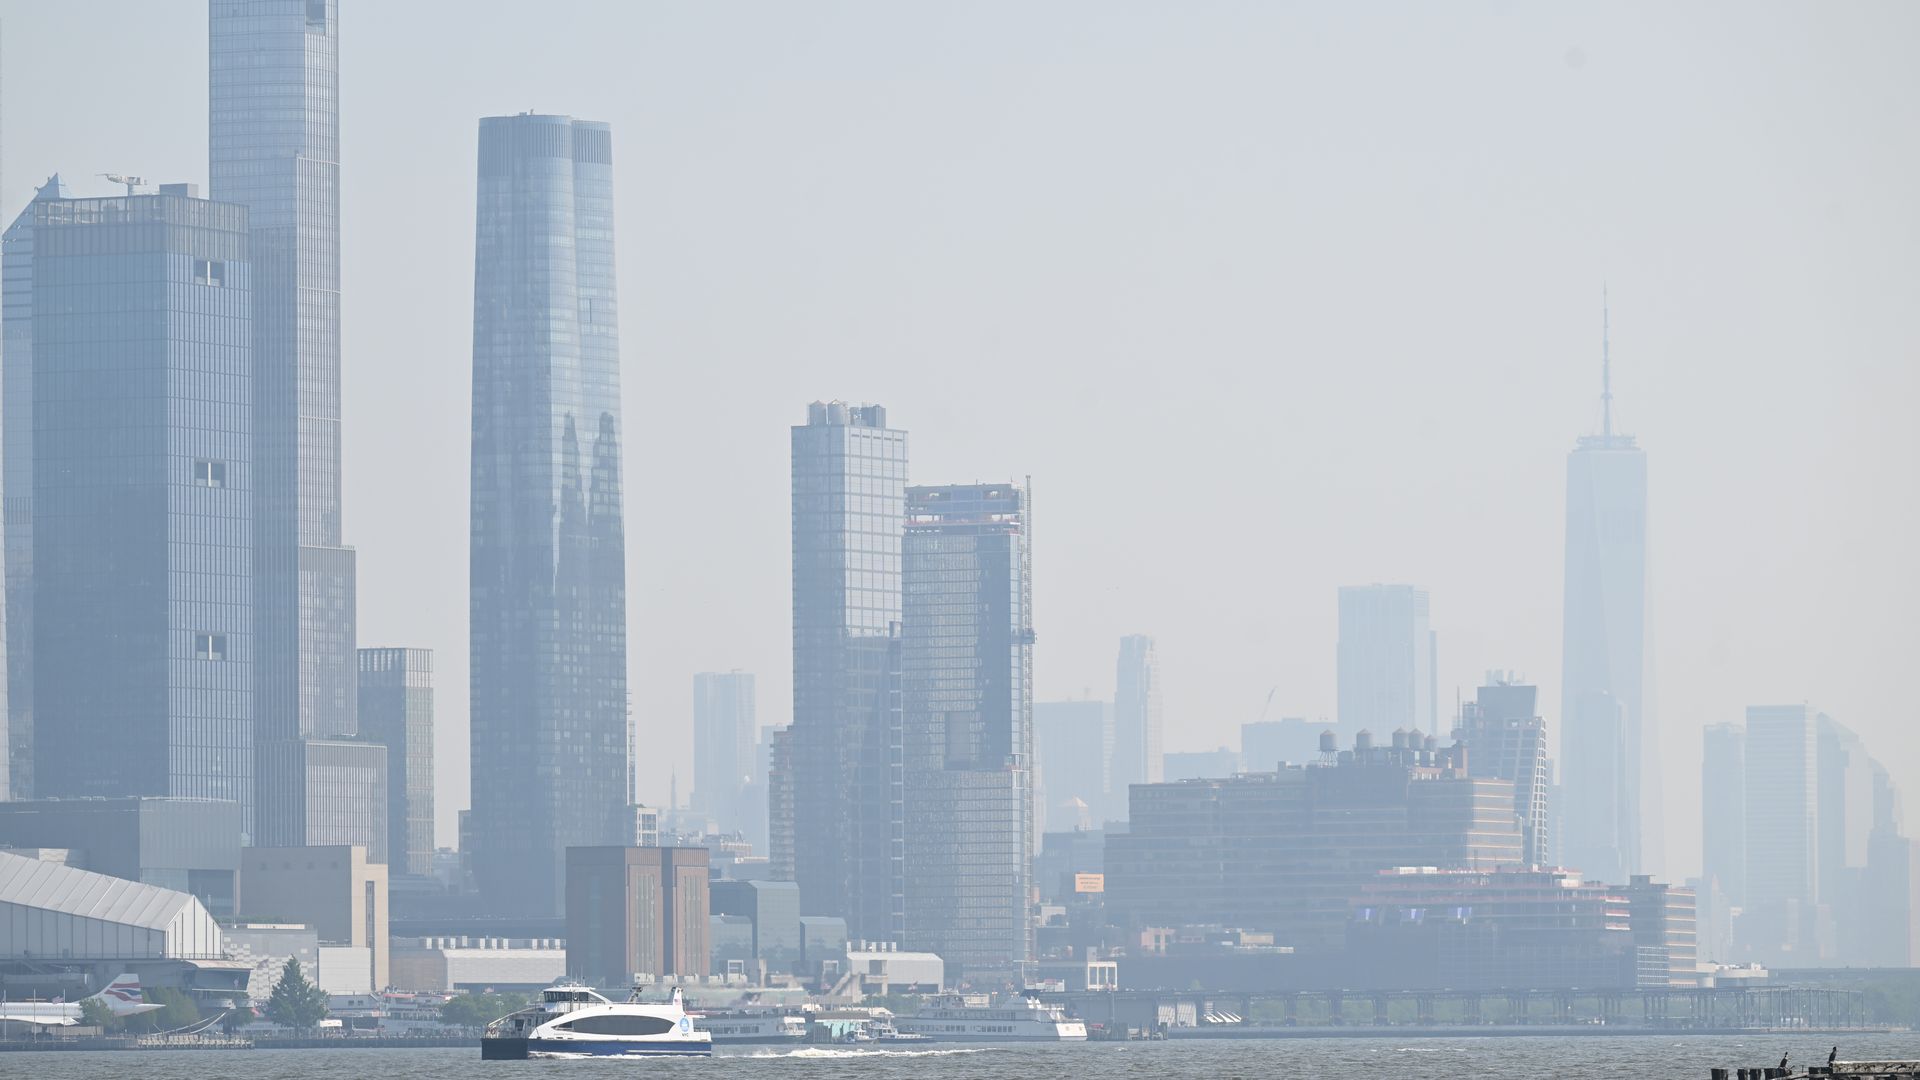 A view of hazy sky which wildfires in Canada impacts and reduces air quality in New York, United States on May 30.